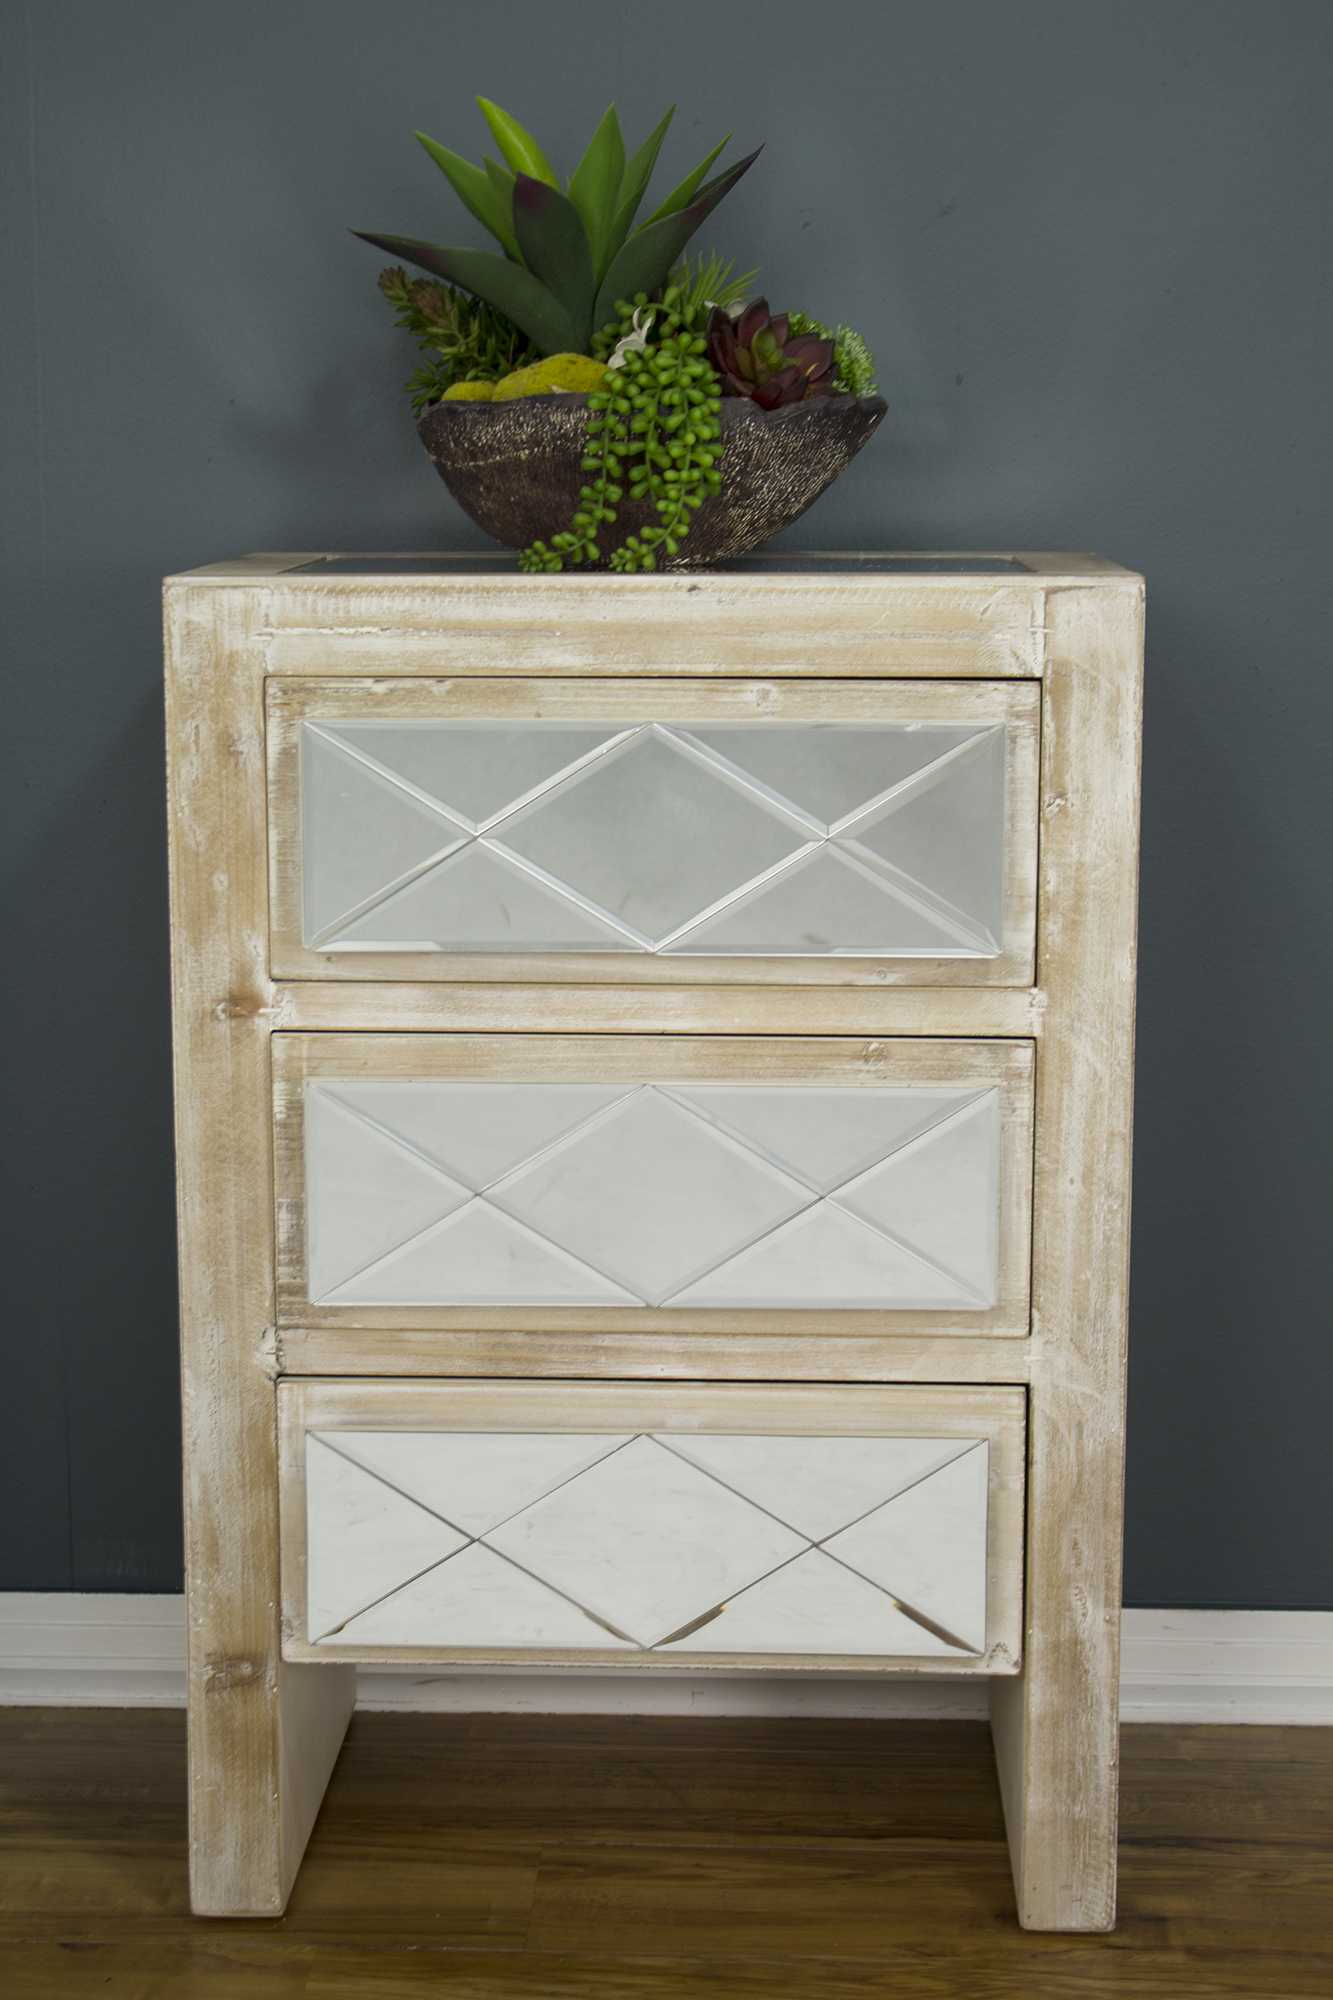 19.6" X 13.8" X 29" White Washed MDF Wood Mirrored Glass Accent Cabinet with Drawers and Mirrored Glass